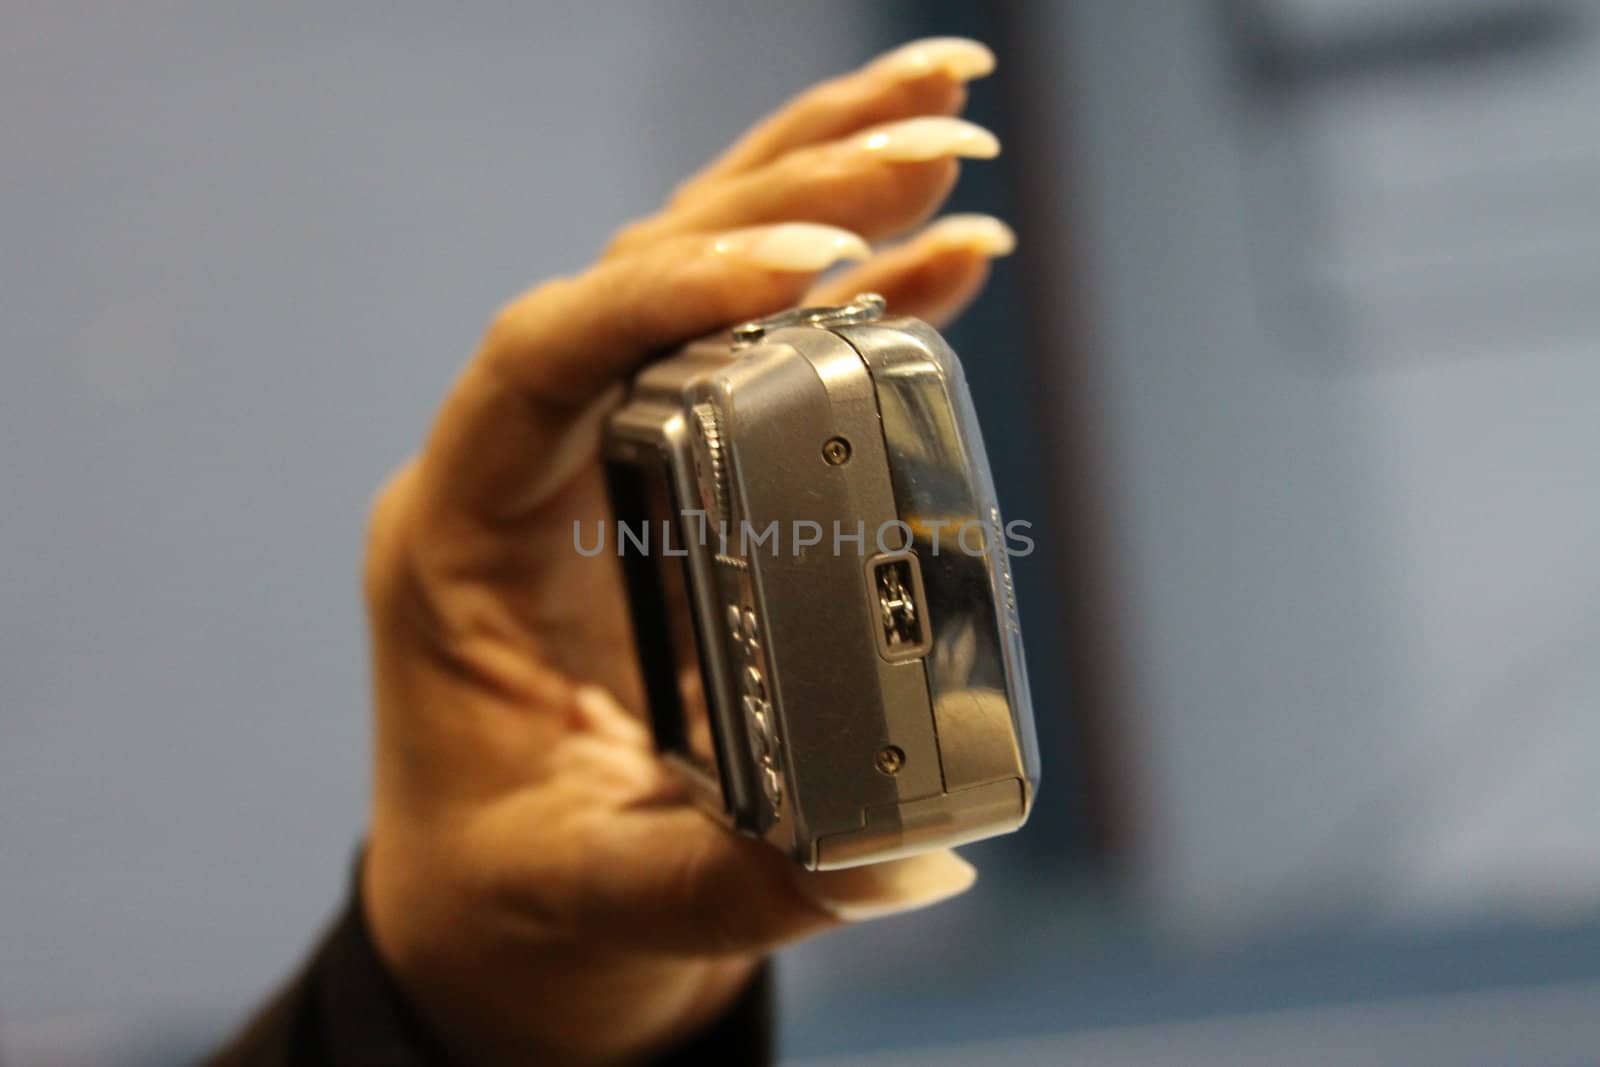 Close up of woman's hand holding digital camera.